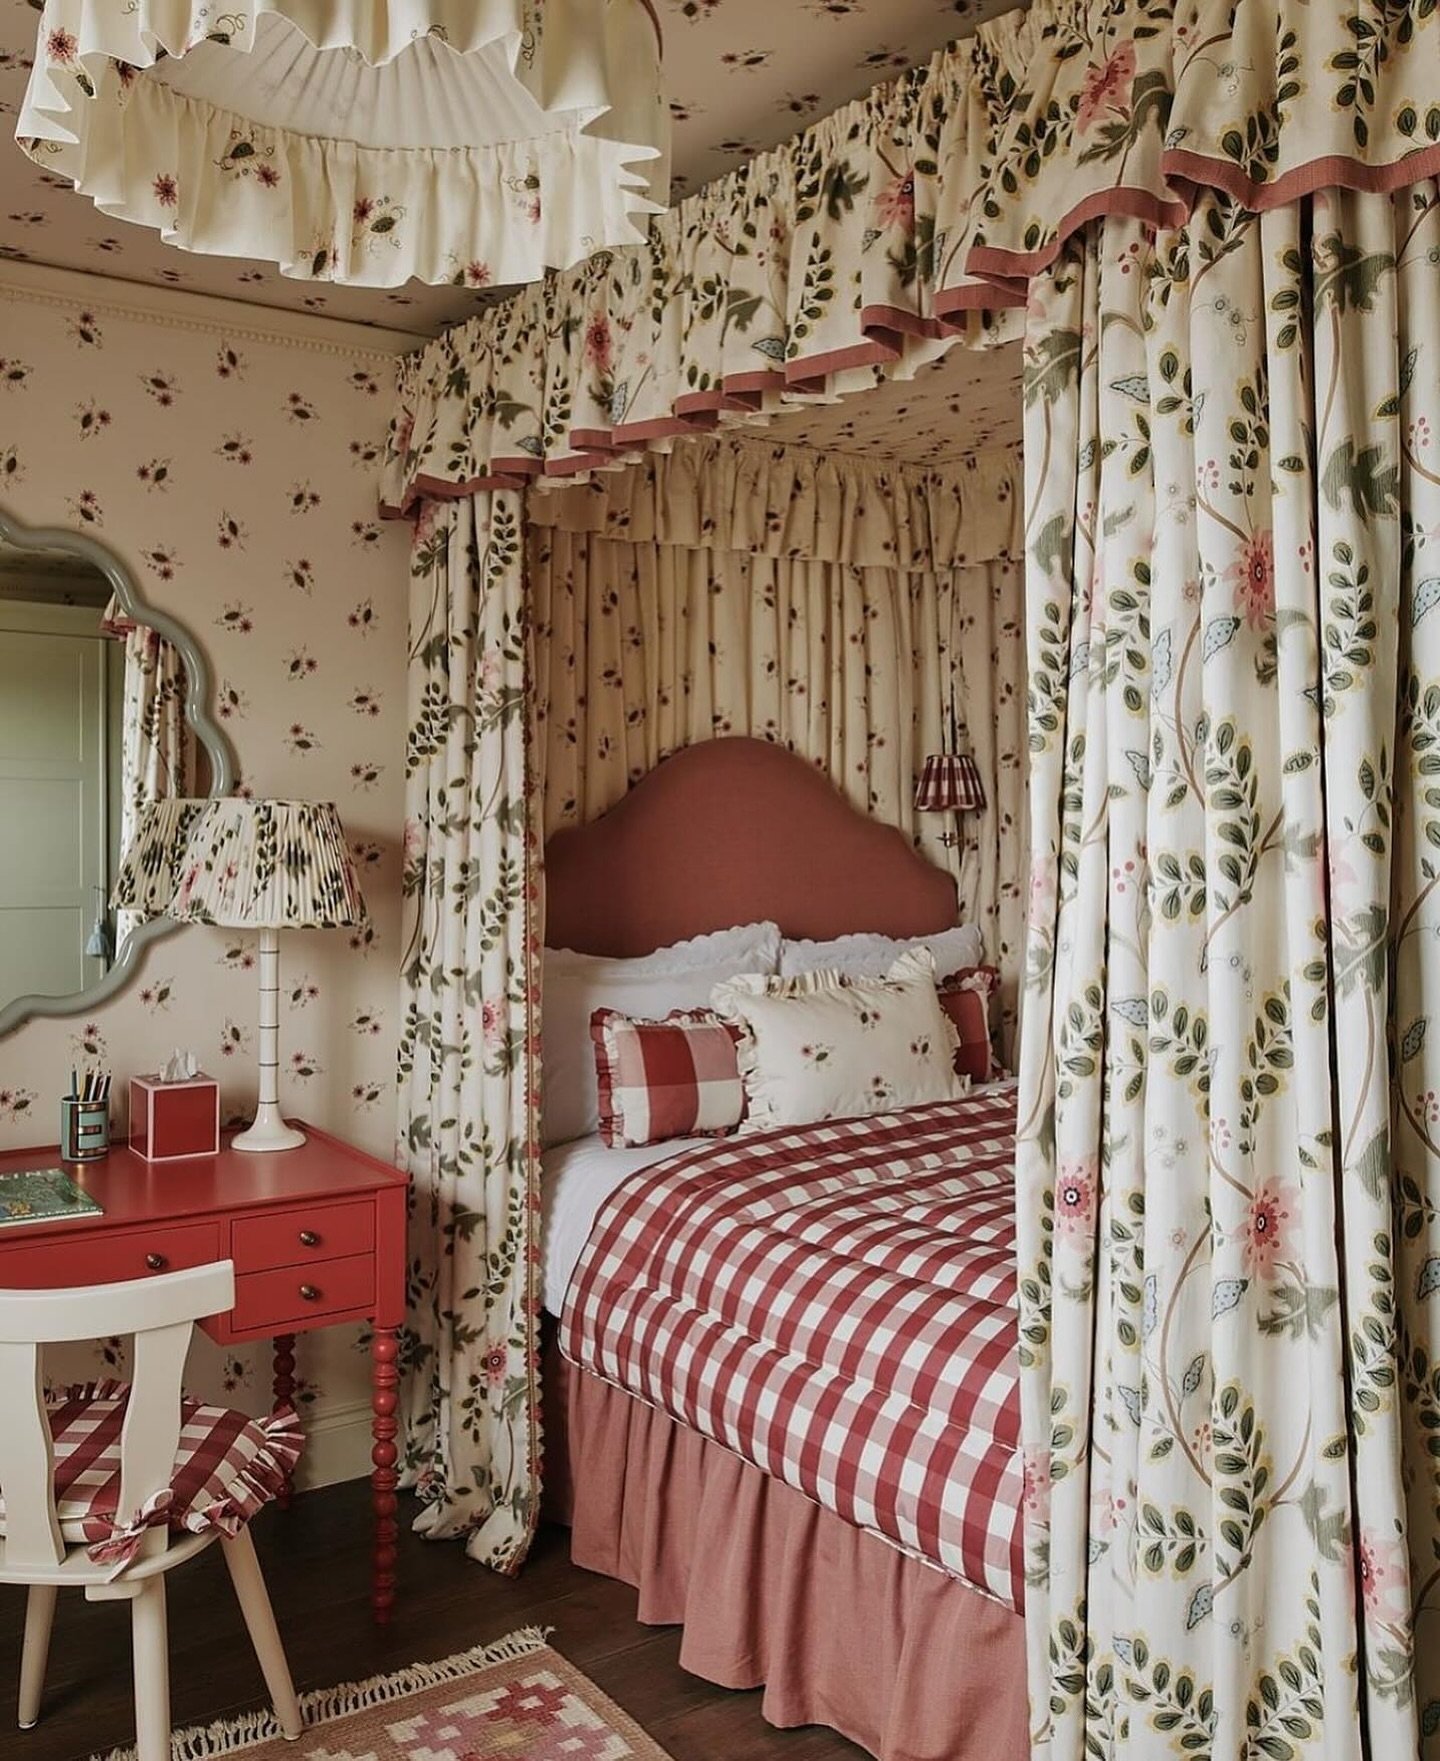 Because there&rsquo;s no such thing as too much print or pattern! This darling bedroom design screams summertime &mdash; and we are here for it! 🍒🍉 Design: @salvesengraham // Photo by @horwoodphoto